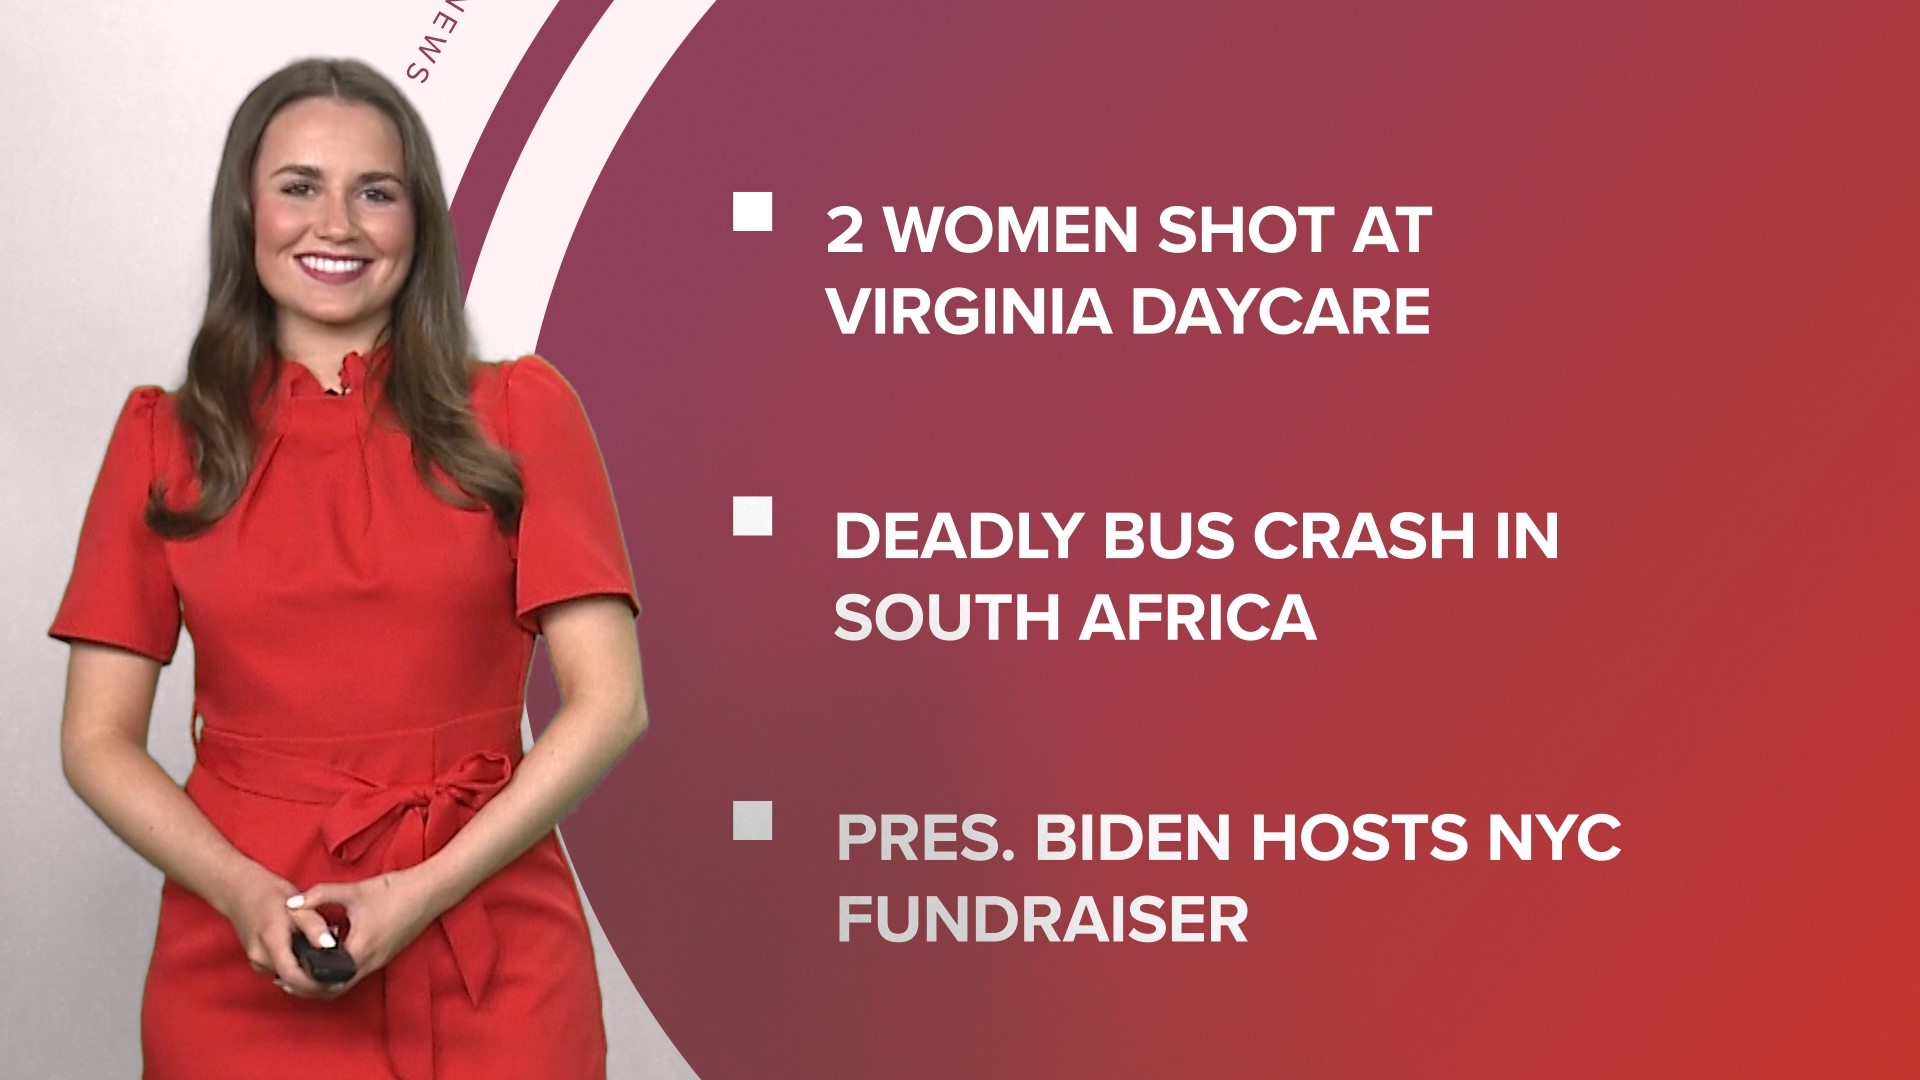 A look at what is happening in the news from a deadly bus crash in South Africa to a big fundraiser for Pres. Biden and preparing for the April 8 solar eclipse.